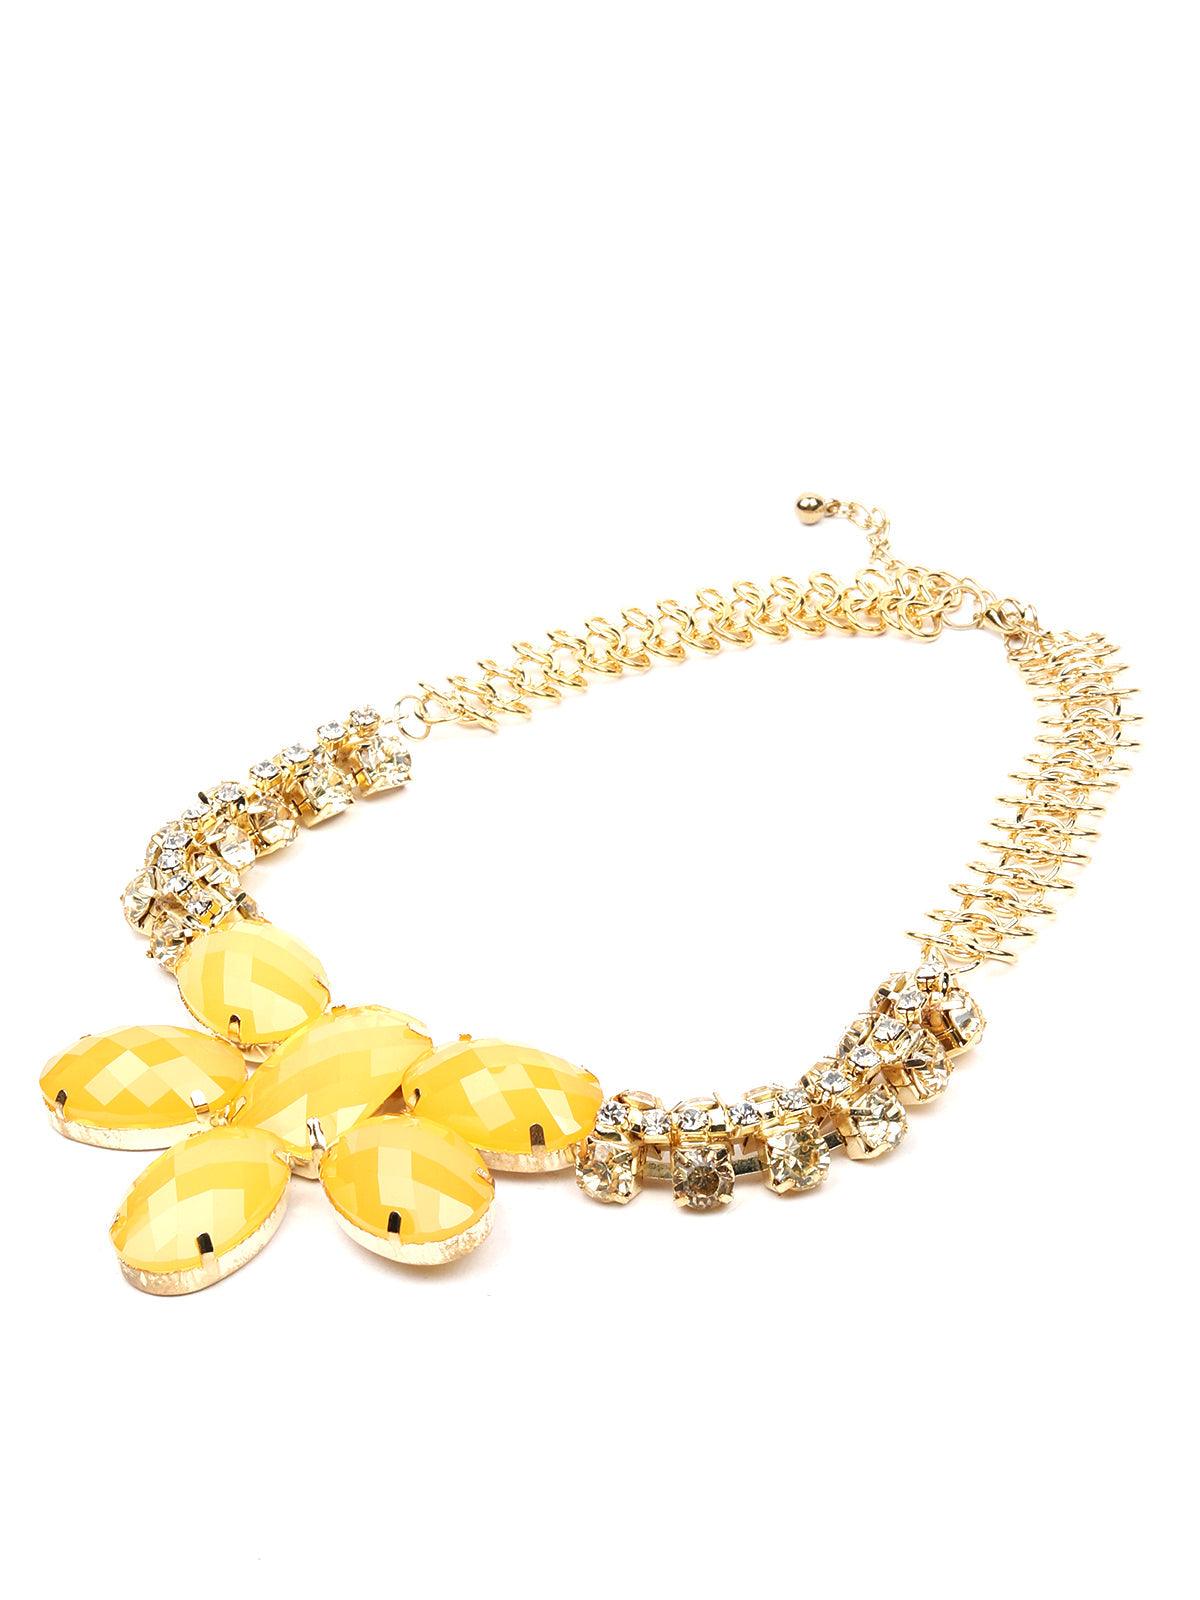 Vibrant yellow stunning necklace - Odette